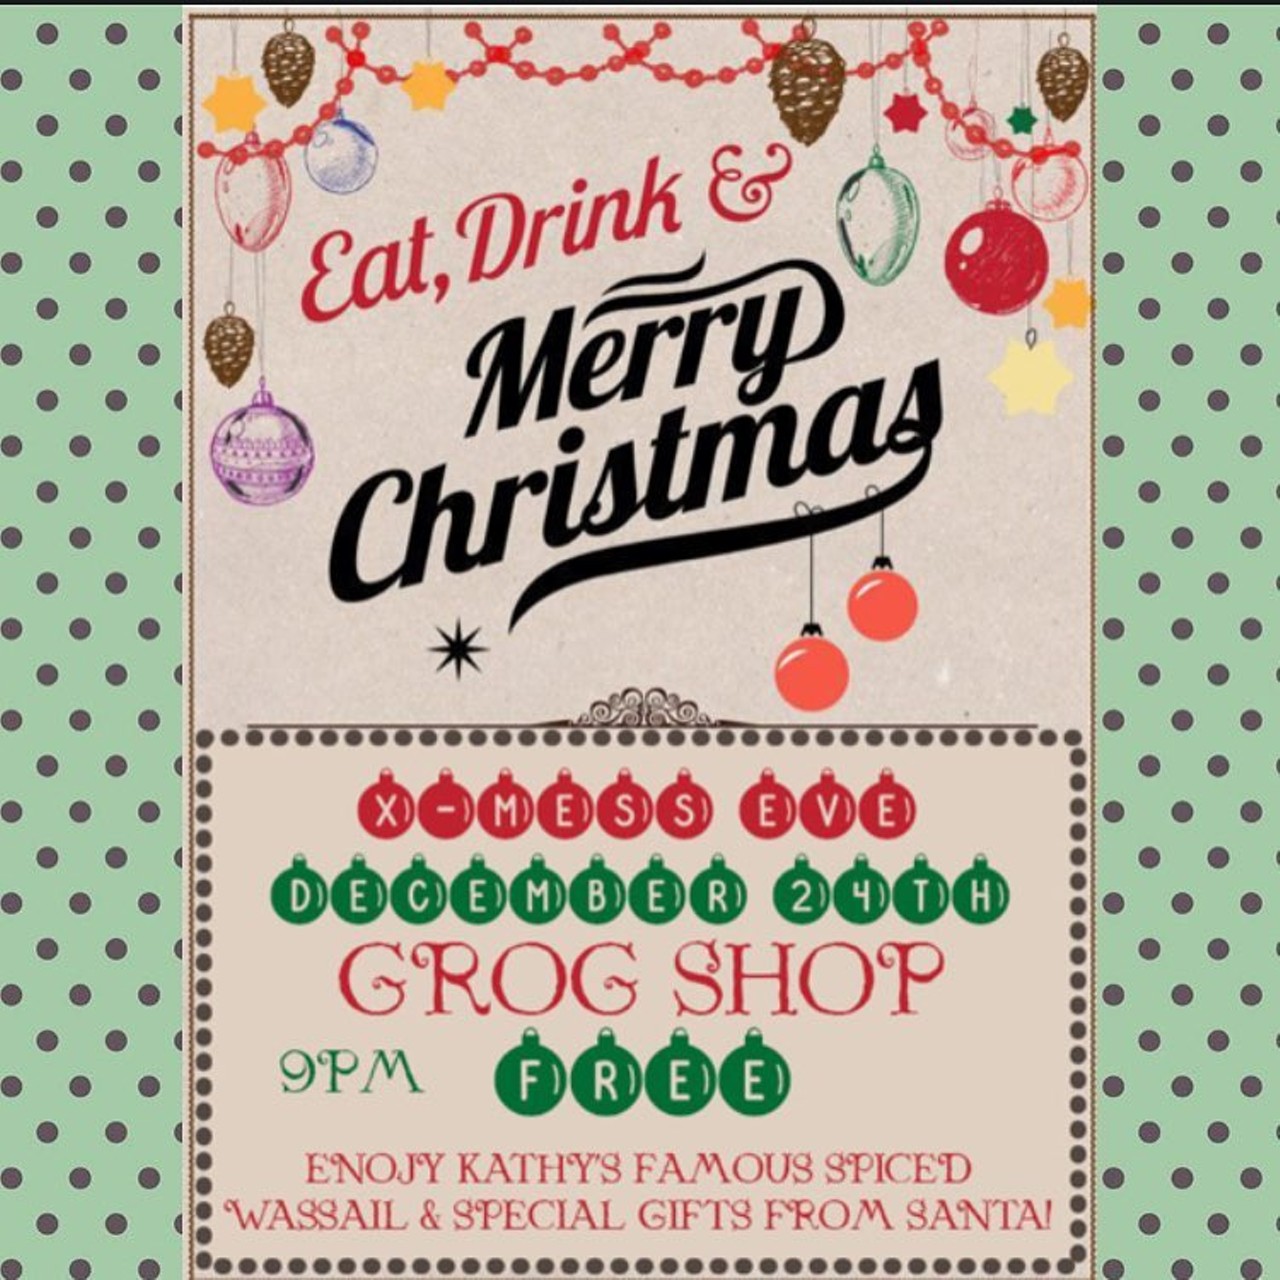 X-Mess Eve Party at the Grog Shop
When: Sat., Dec. 24, 9 p.m. 
Price: free
Nowhere to go (or, don't wanna go anywhere) on Christmas Eve? Come celebrate the holidays with the Grog Shop and don't worry about admission--it's free. (Photo courtesy Grog Shop/Facebook)